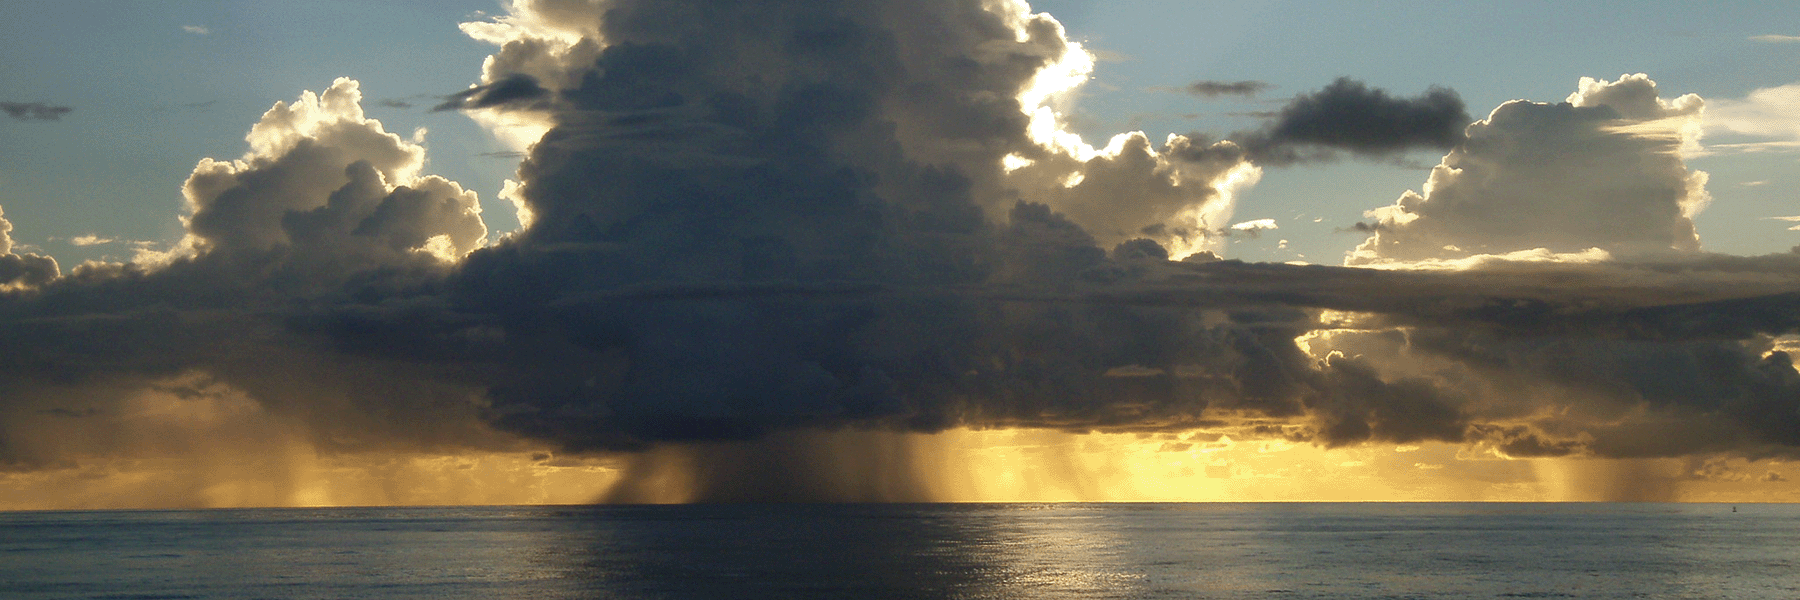 Rain clouds over the ocean representing tropical convection.